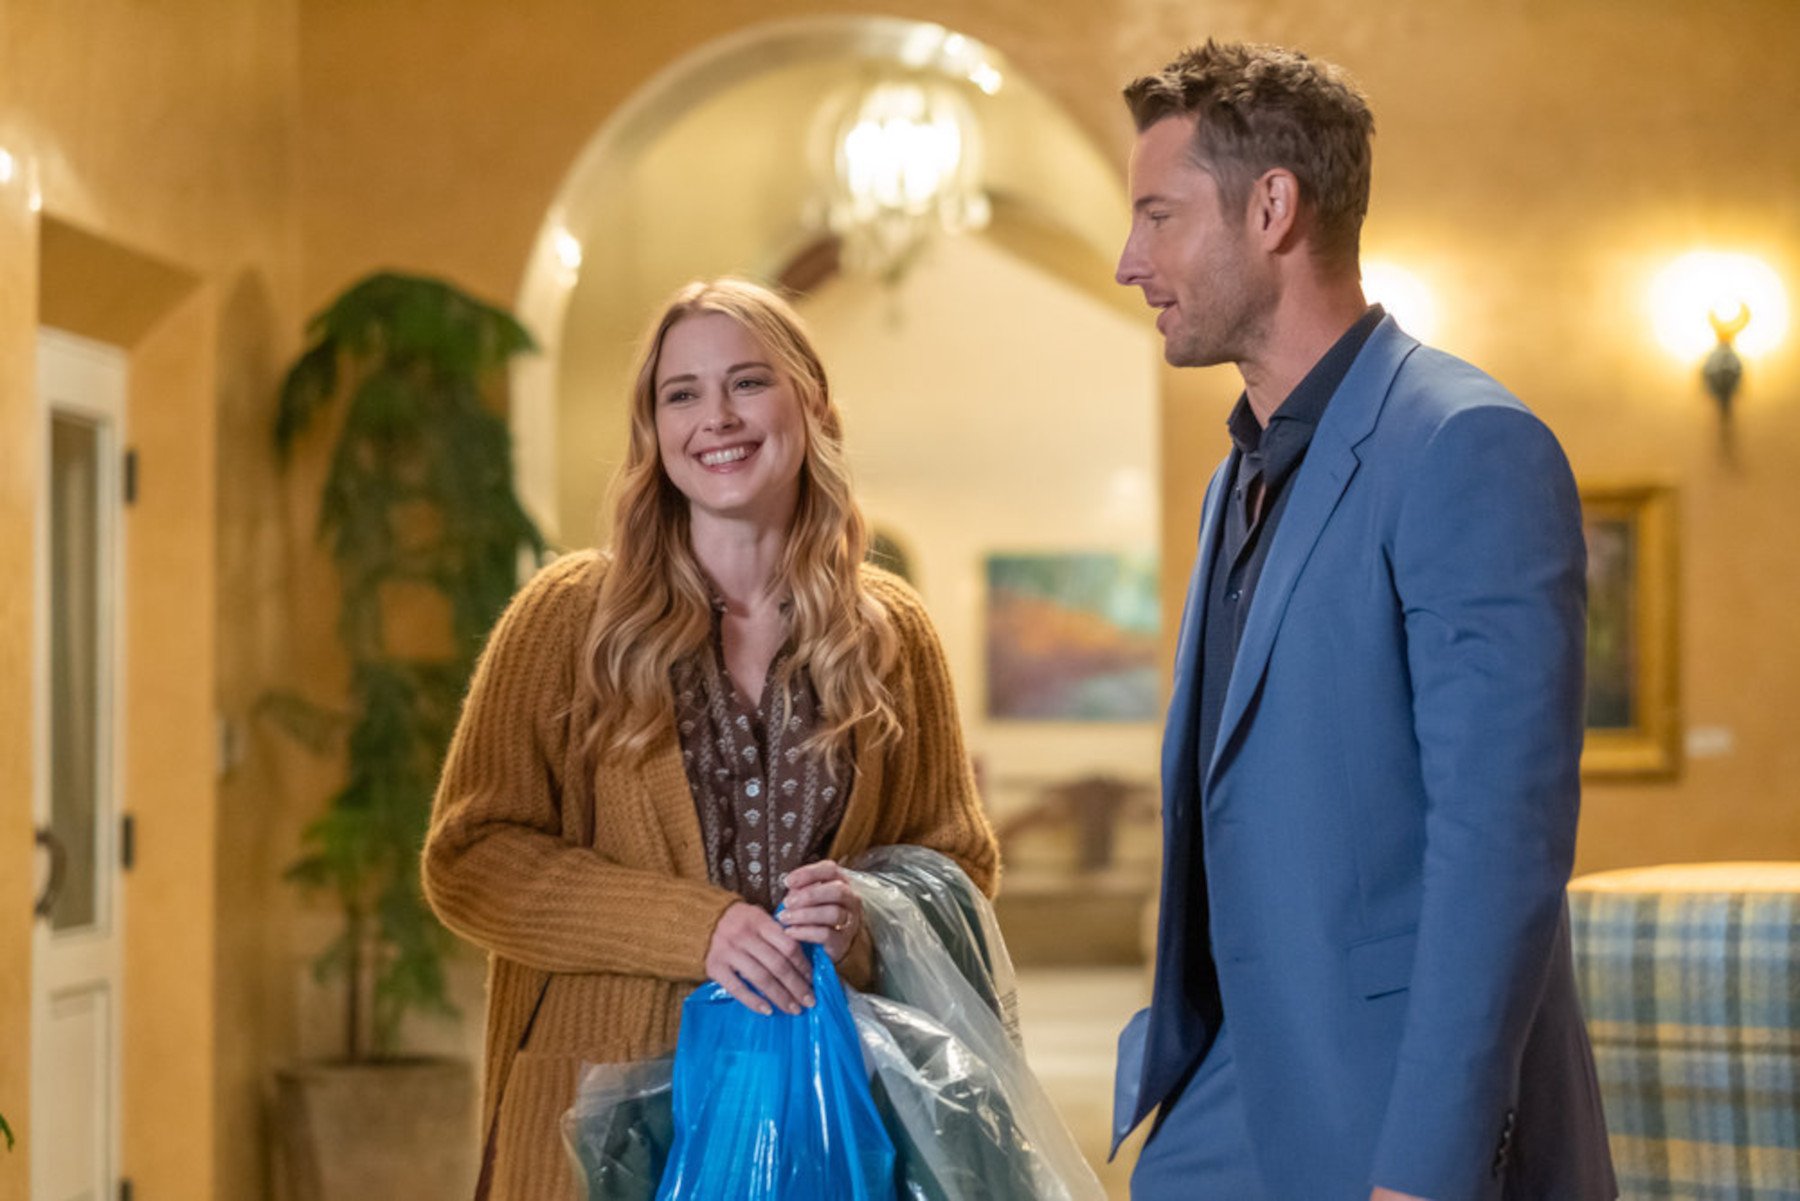 Alexandra Breckenridge and Justin Hartley as Sophie and Kevin in 'This Is Us' Season 6. She's wearing a yellow sweater and smiling, and he's wearing a blue suit and looking at her.